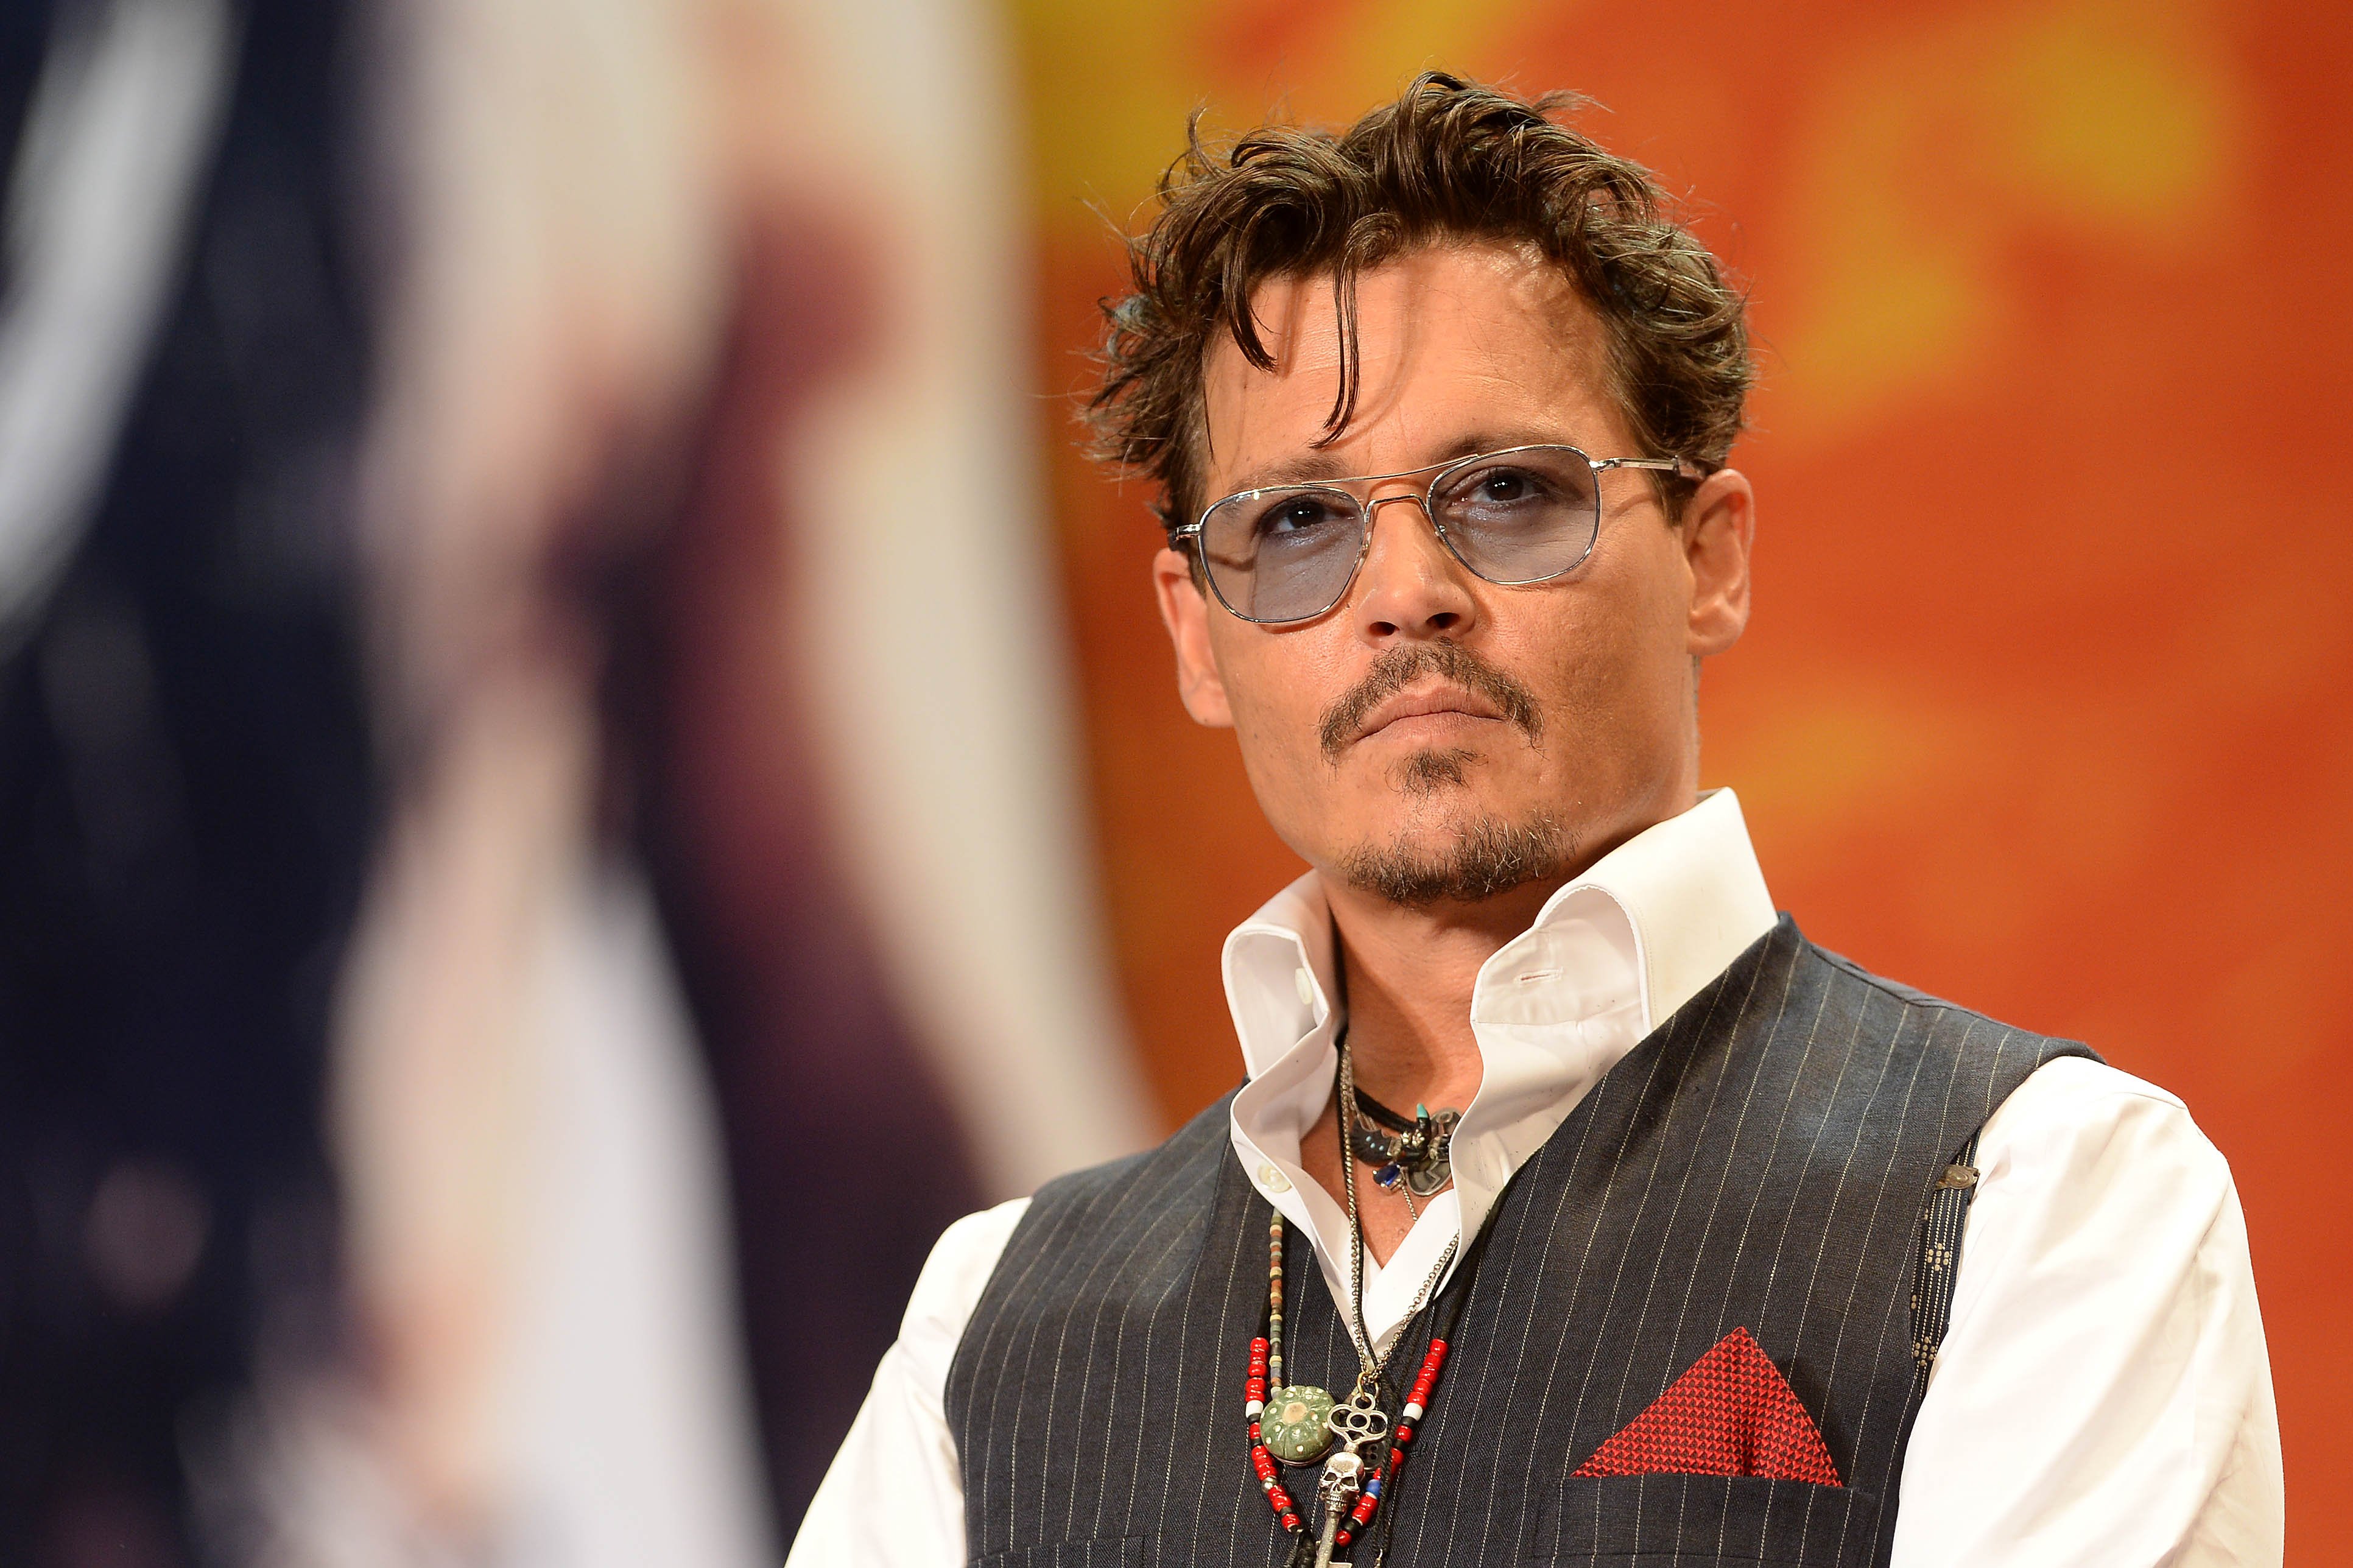 Johnny Depp attends the "Lone Ranger" Japan premiere at Roppongi Hills in Tokyo, Japan on July 17, 2013. | Source: Getty Images